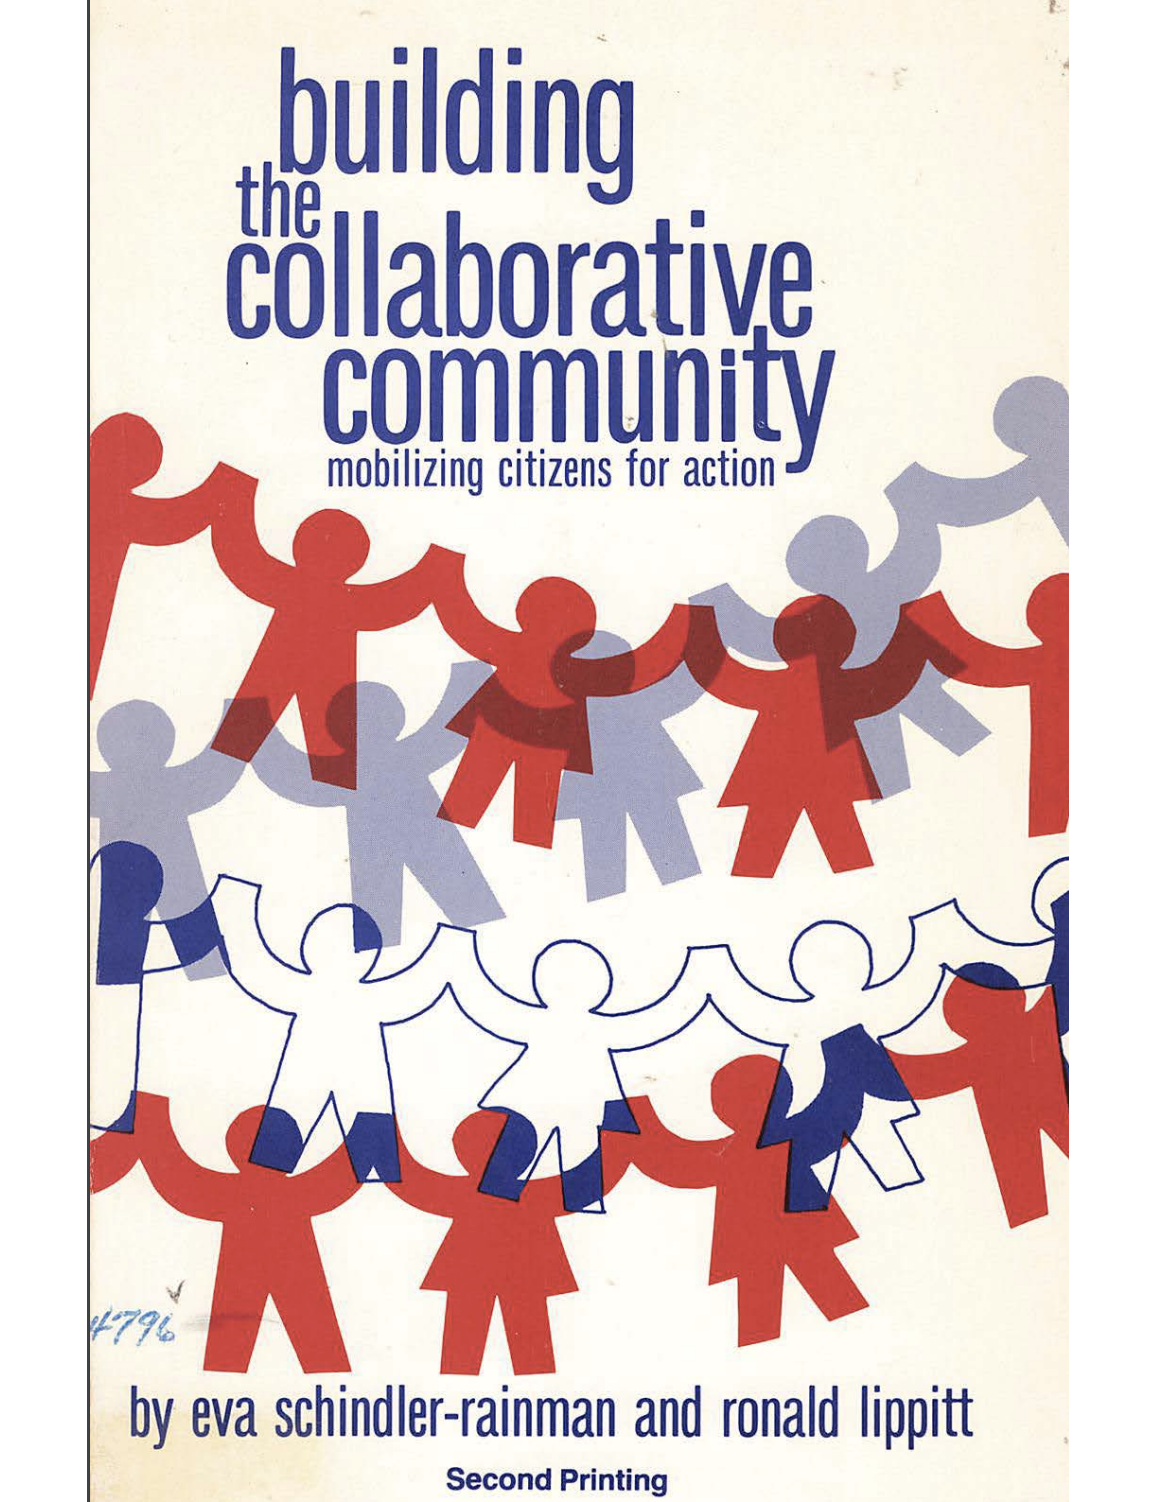 Cover shows cutout figures holding hands